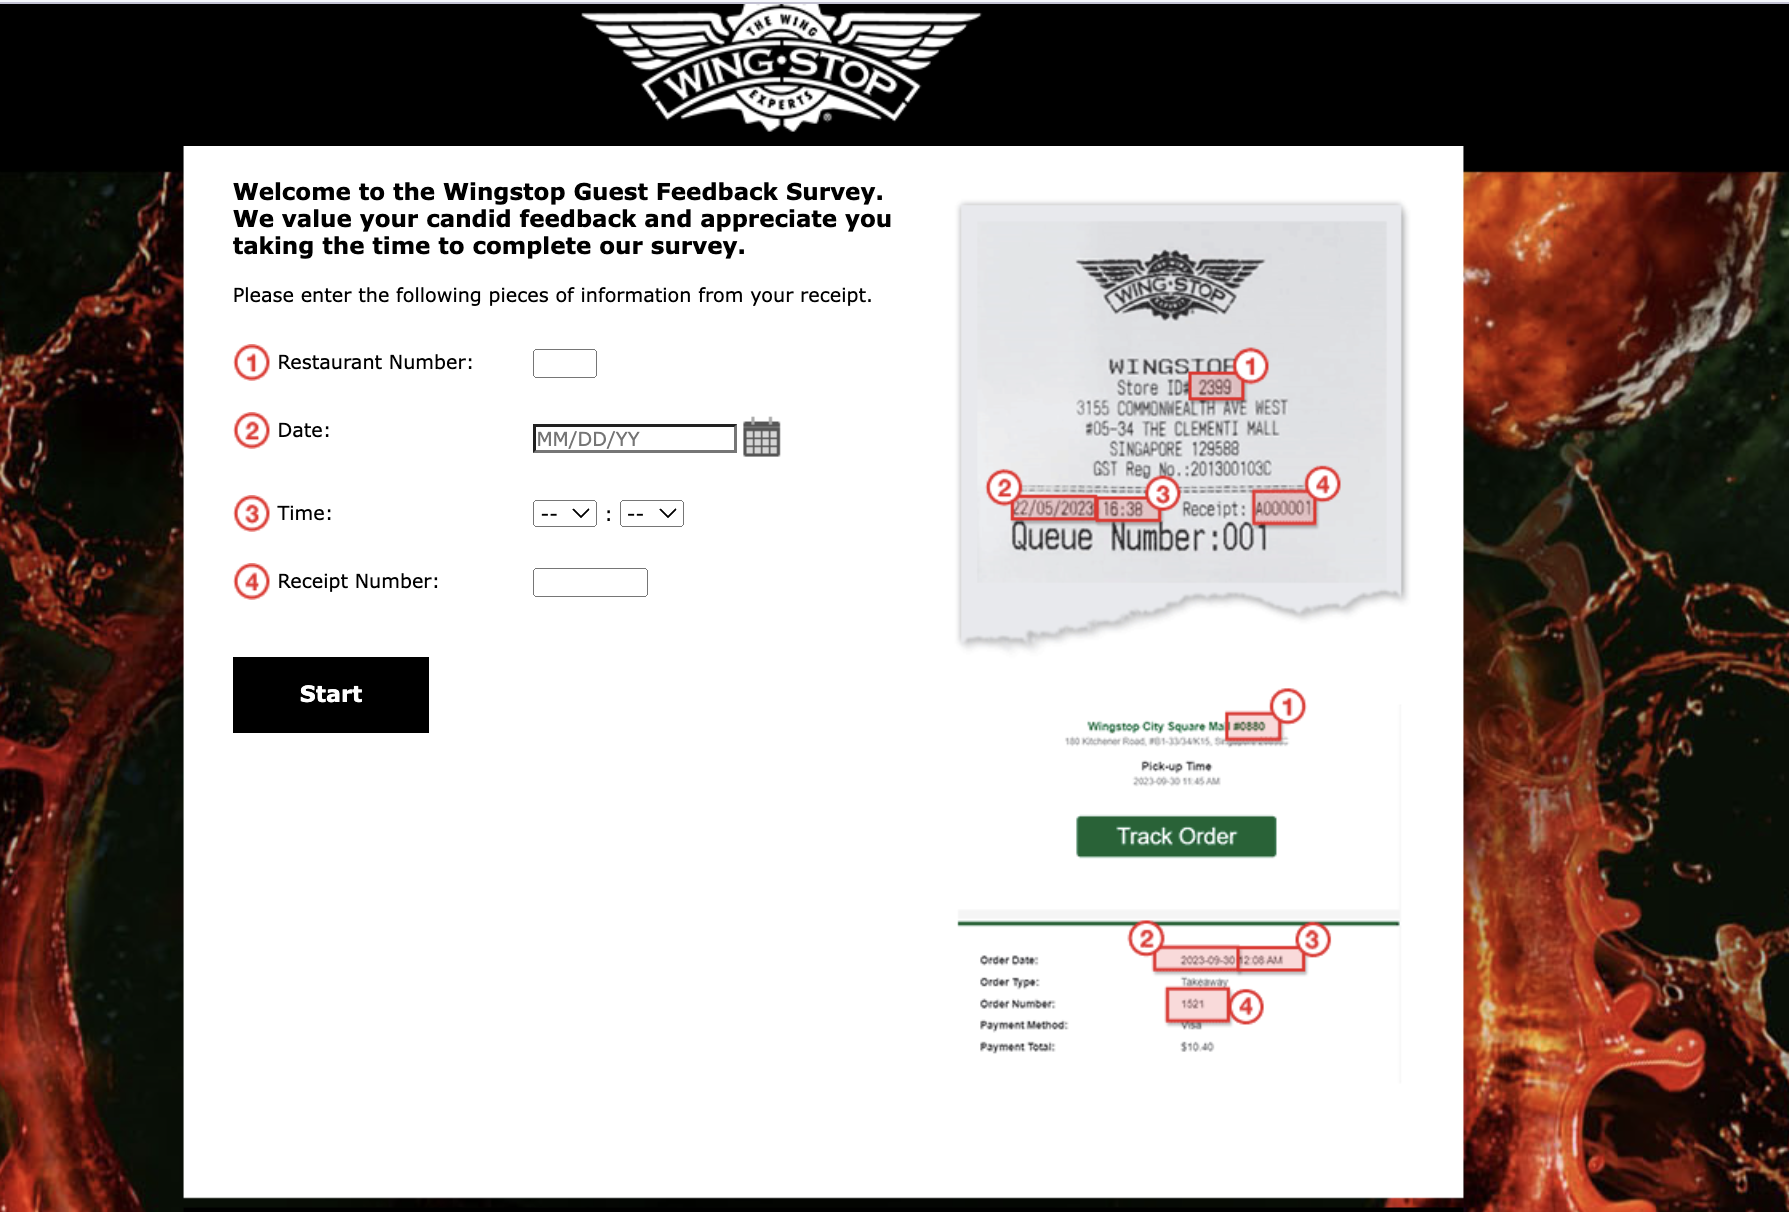 Wingstop.com/survey to Win a $50 Gift Card